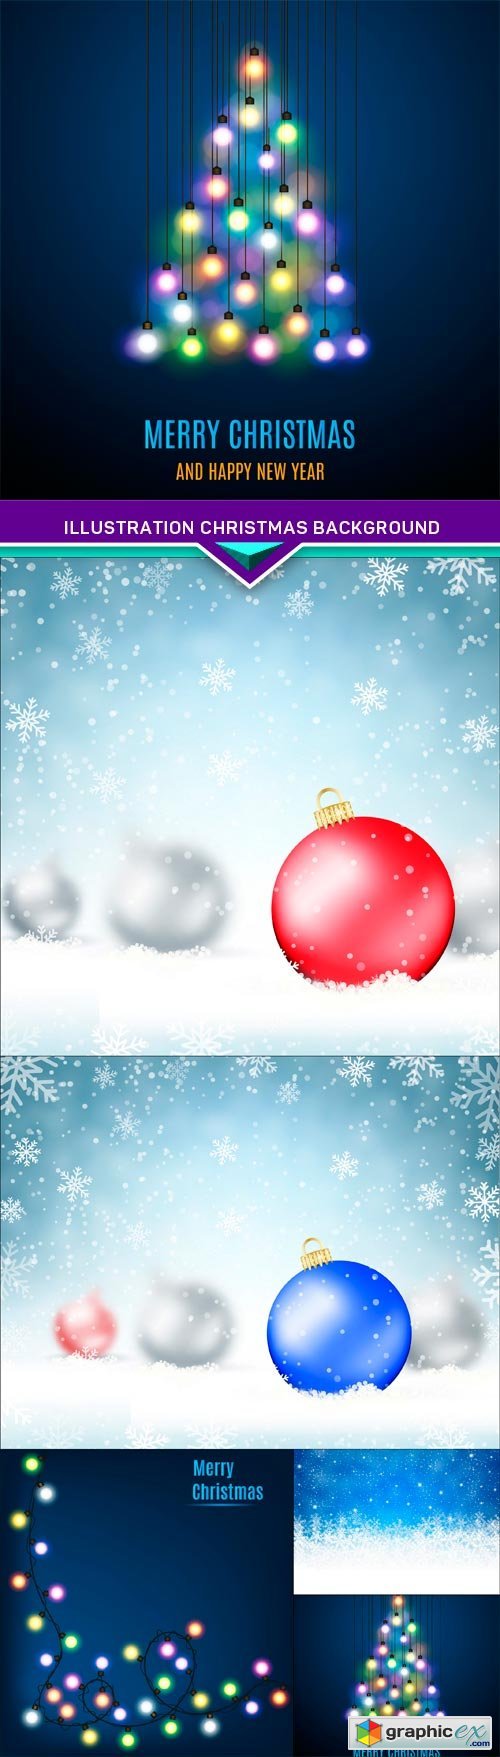 Illustration Christmas background with glass balls and snowflakes 5X EPS